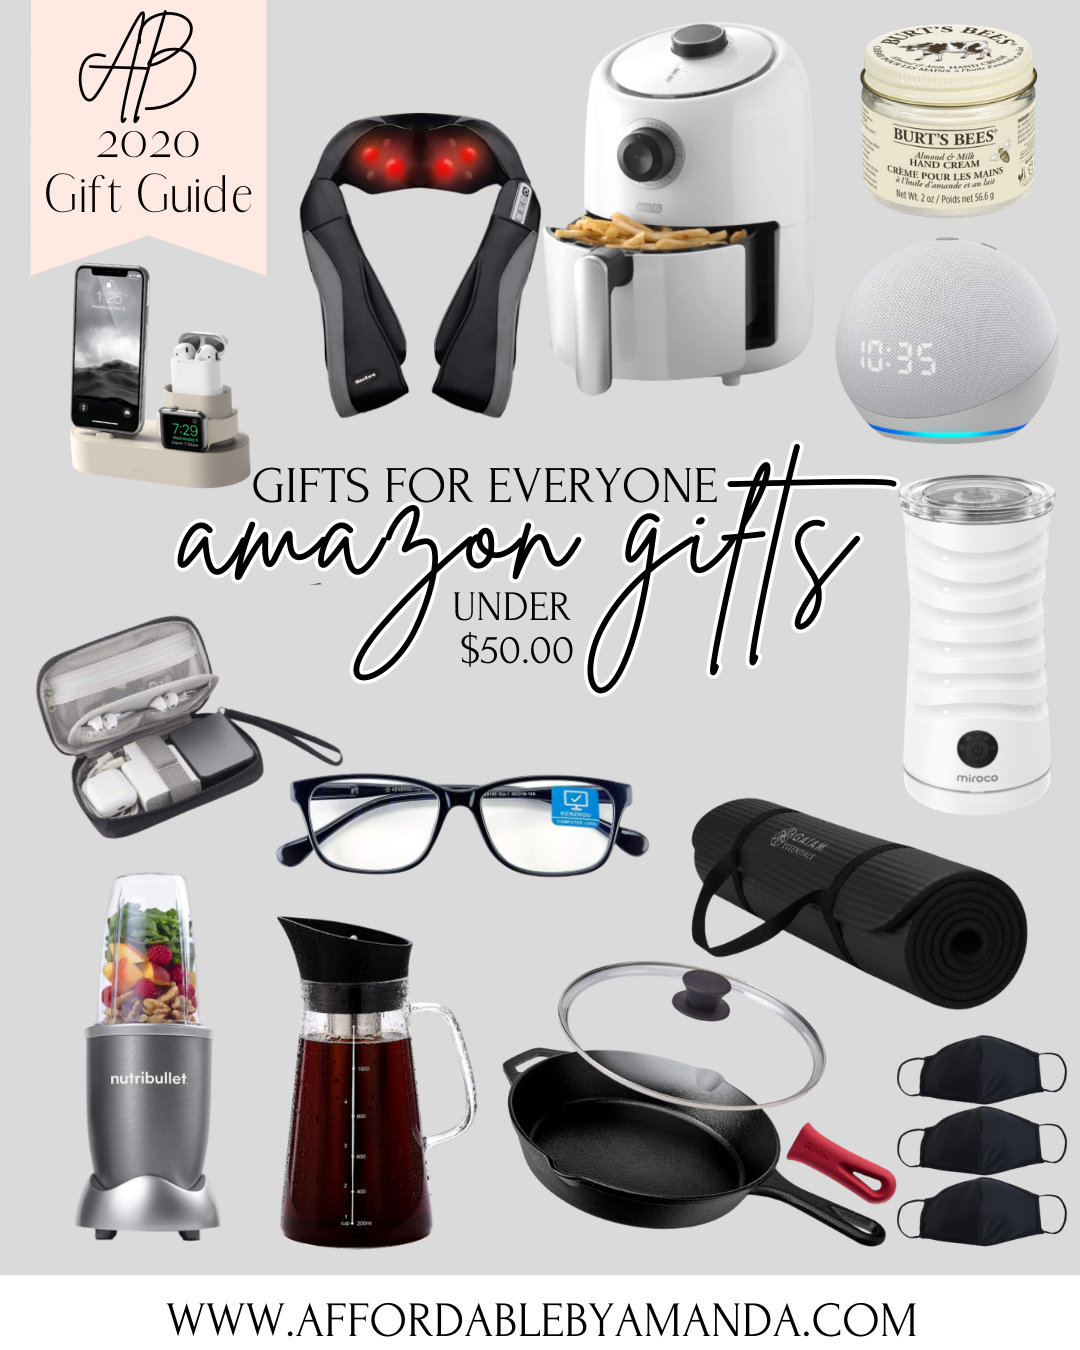 Amazon Gift Ideas - Amazon Gift Ideas for Everyone - Affordable by Amanda 